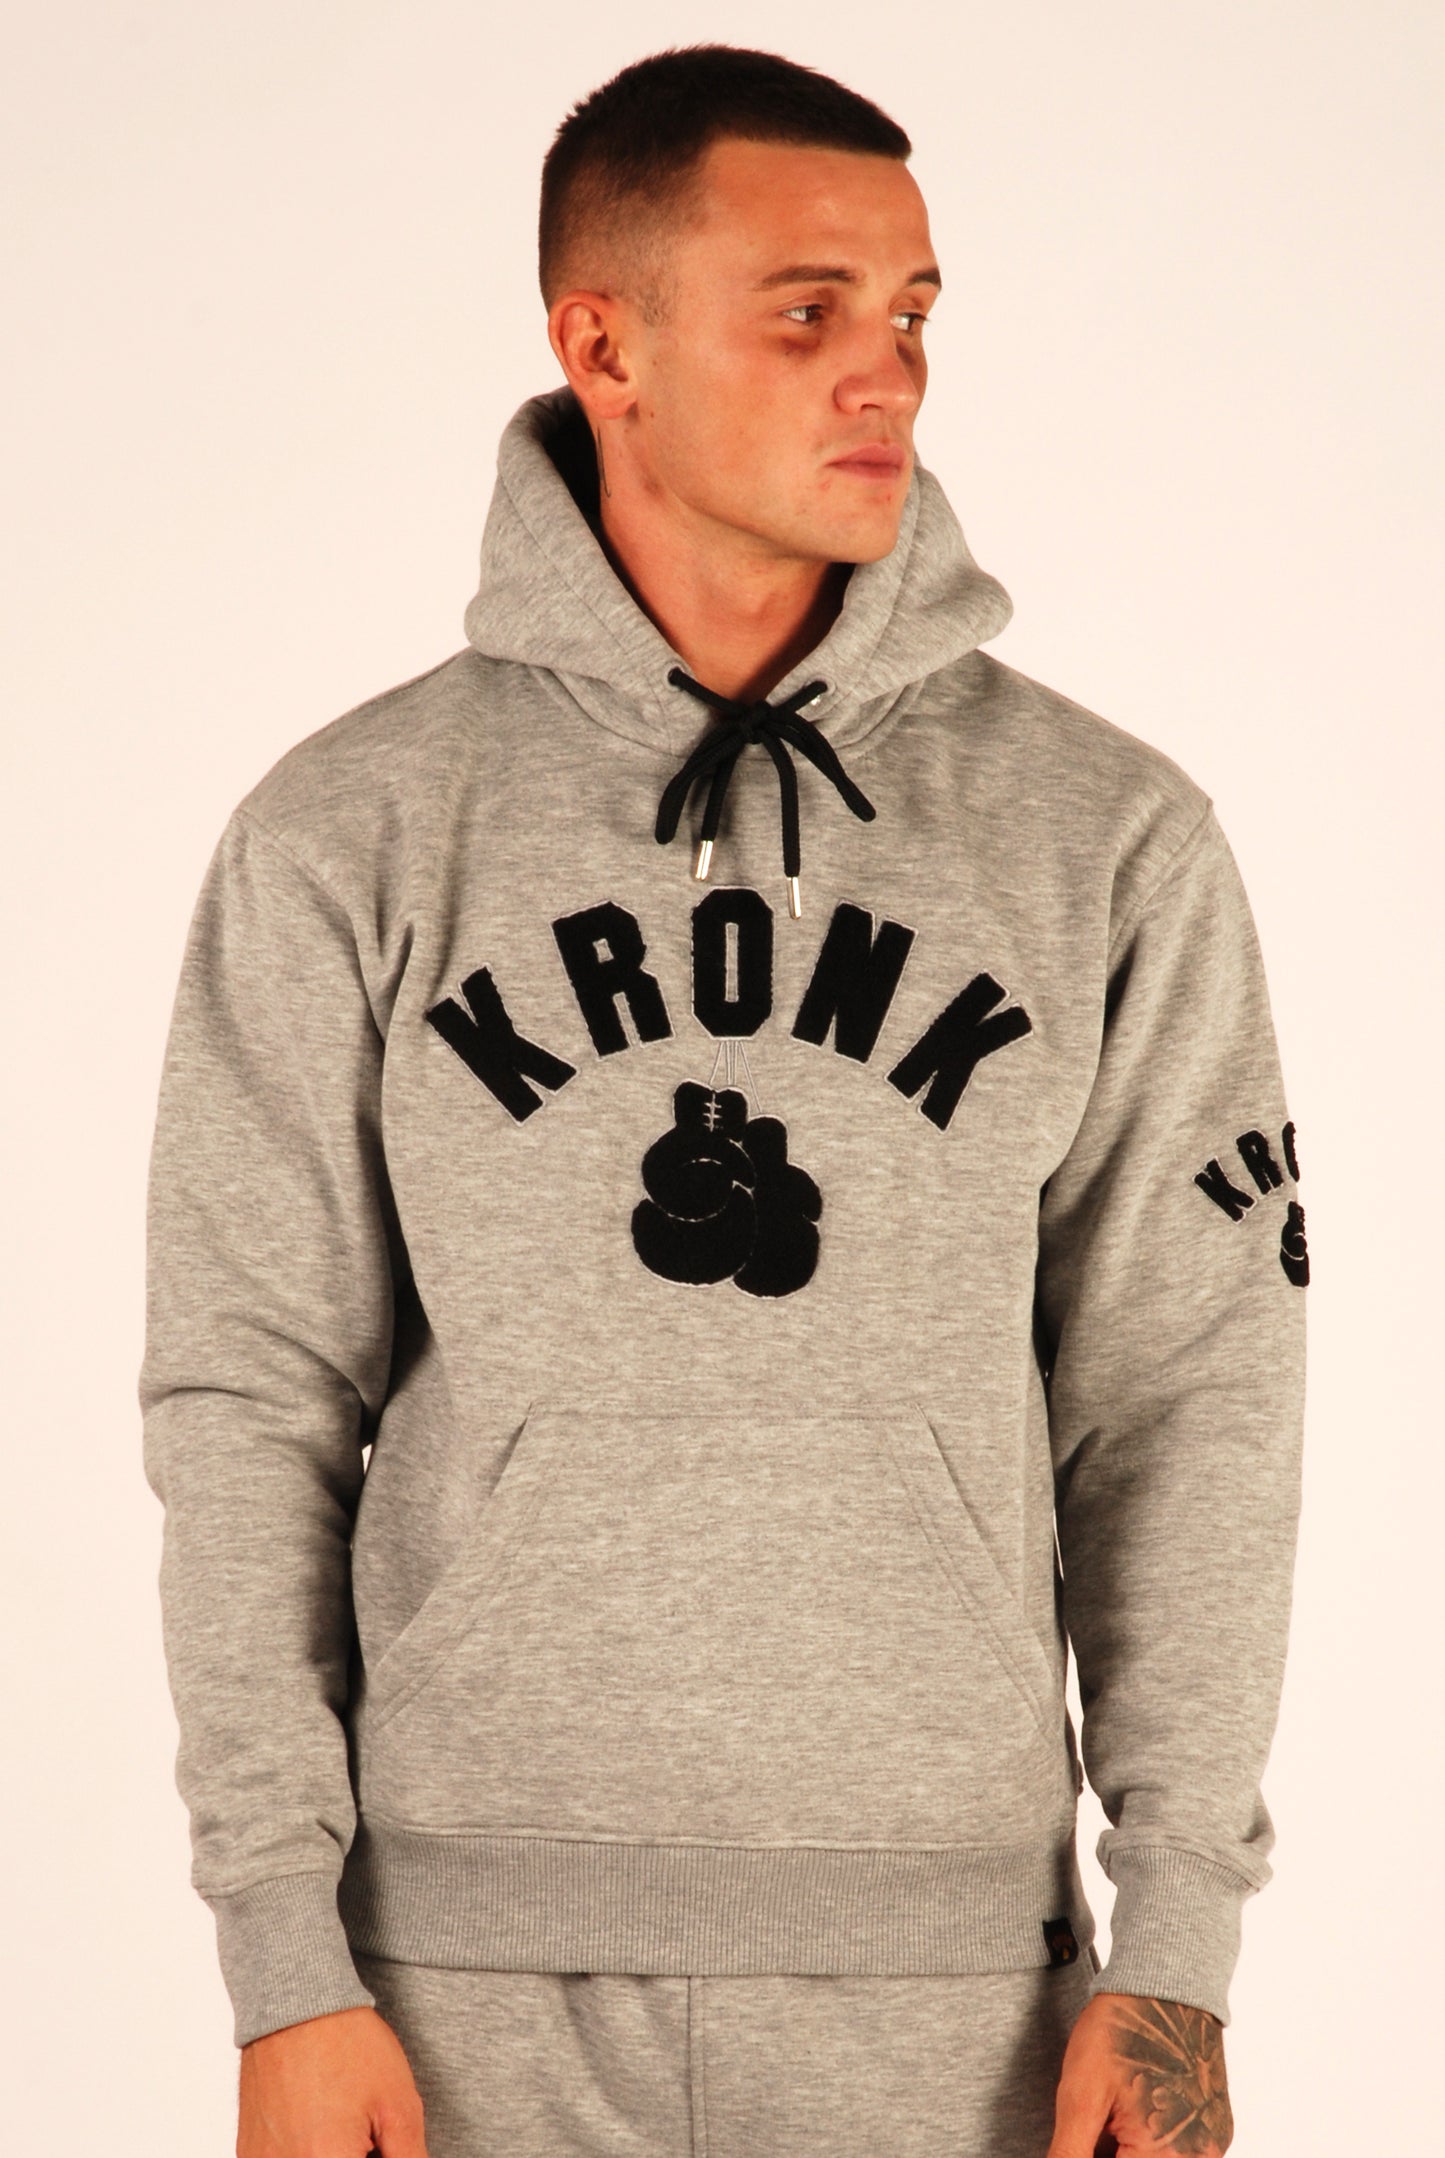 KRONK One Colour Gloves Towelling  Applique Hoodie Regular Fit Sports Grey